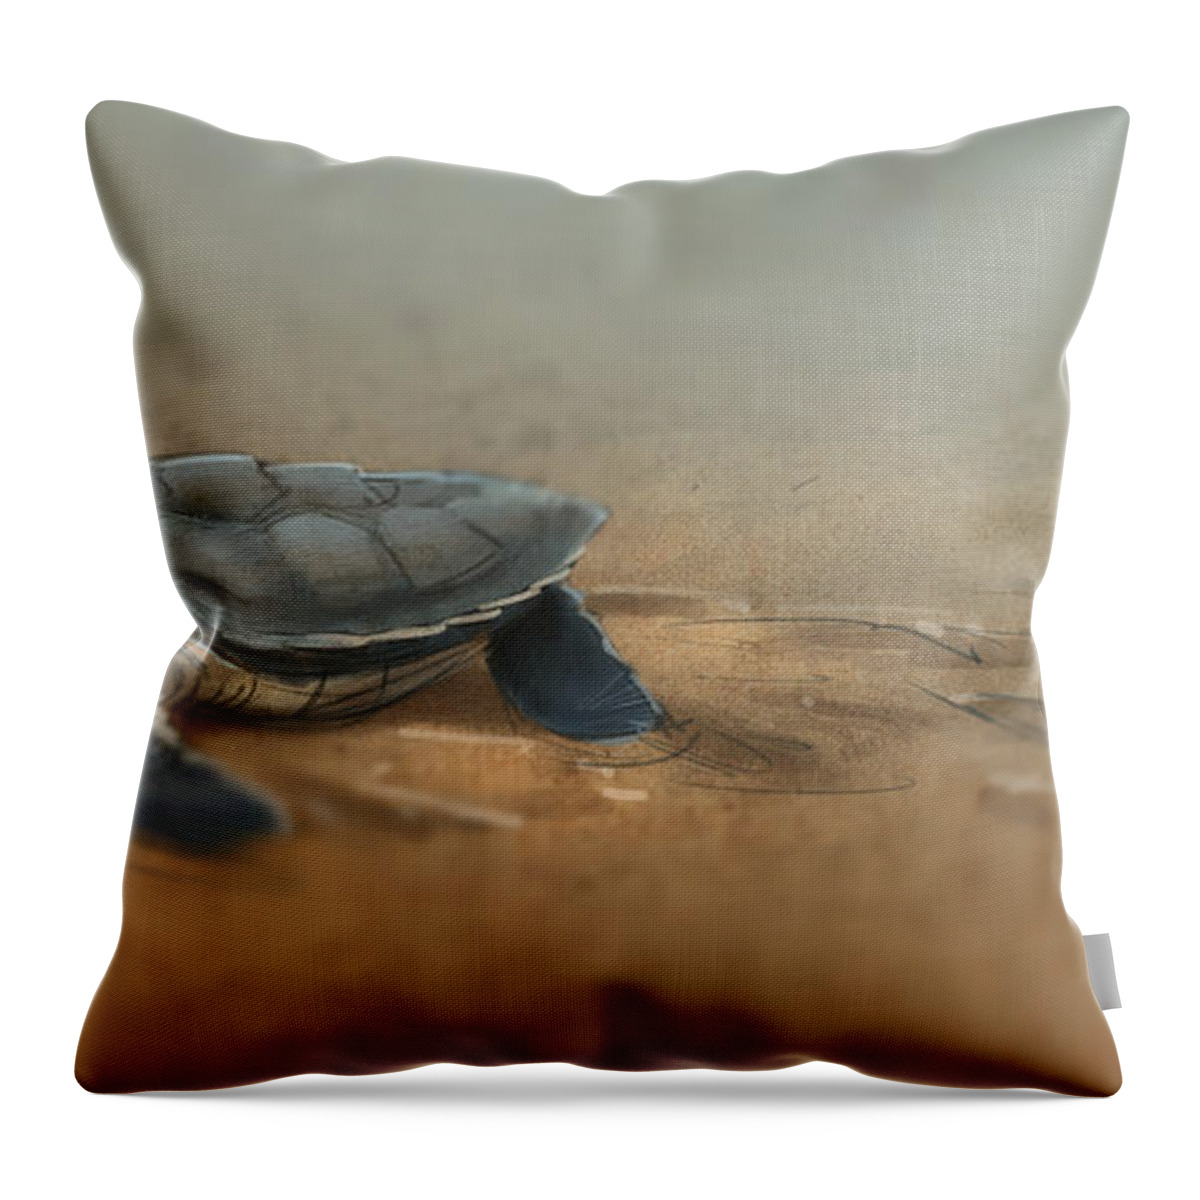 Sea Turtle Throw Pillow featuring the digital art Baby Turtle by Aaron Blaise